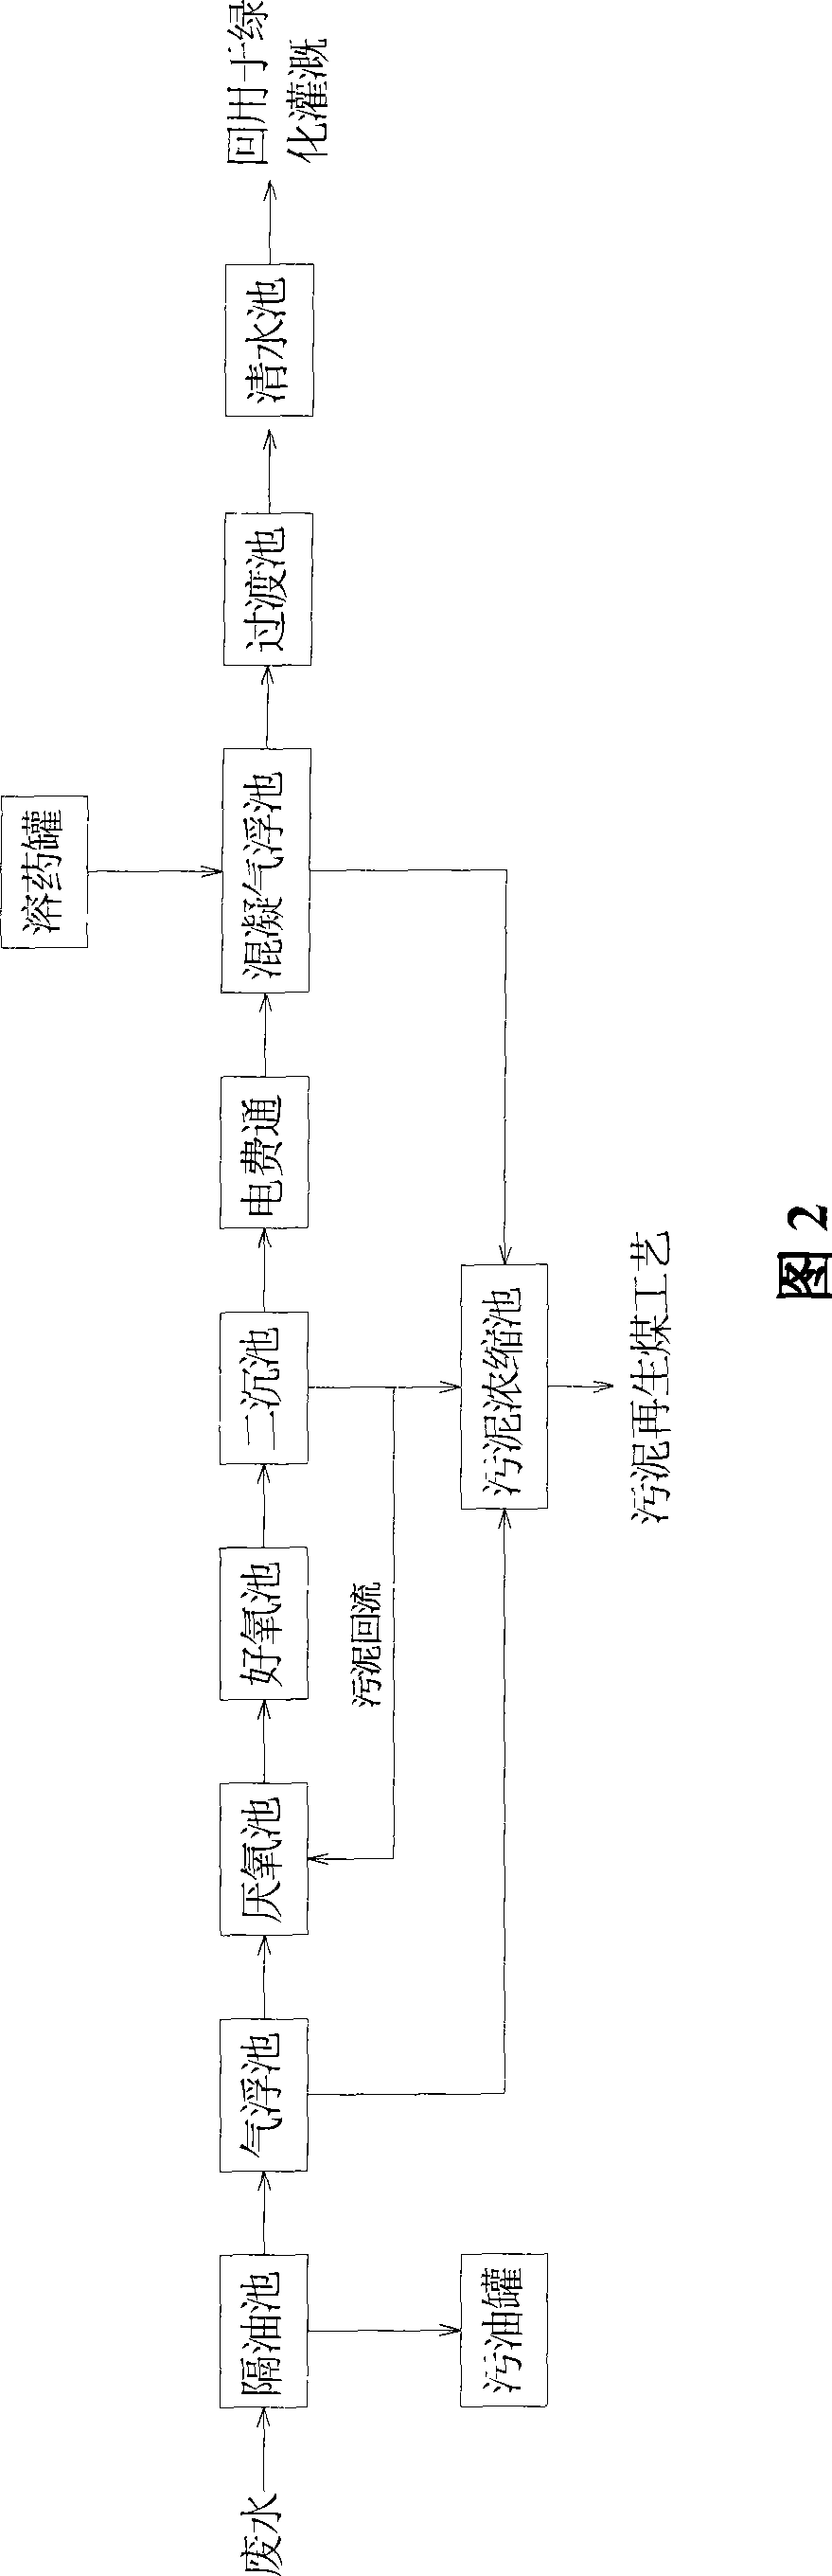 Regenerated coal prepared by oil-containing sludge from oil production field and oil-extraction plant and preparation technology thereof